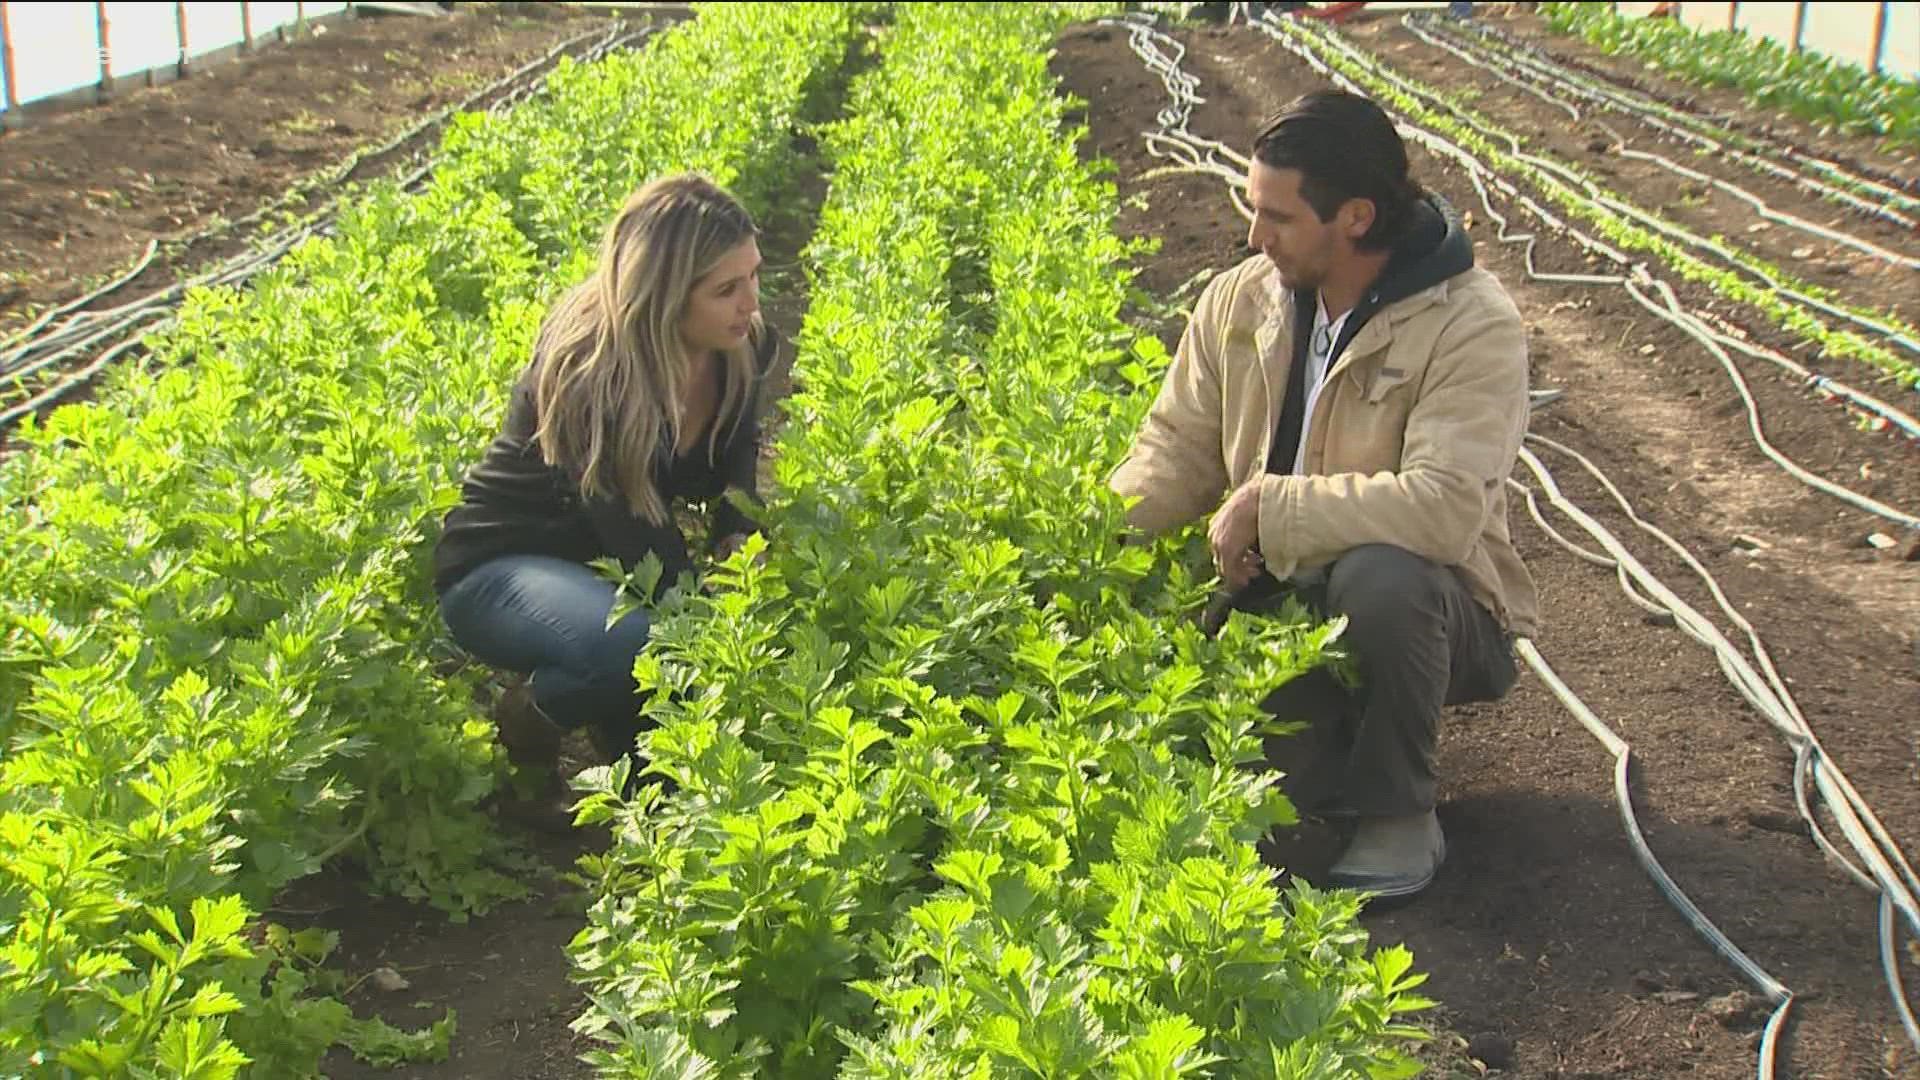 Texas has more farms than any other state, and most of those are small, family-owned businesses. KVUE's Conner Board took a trip to Emadi Acres Farm.